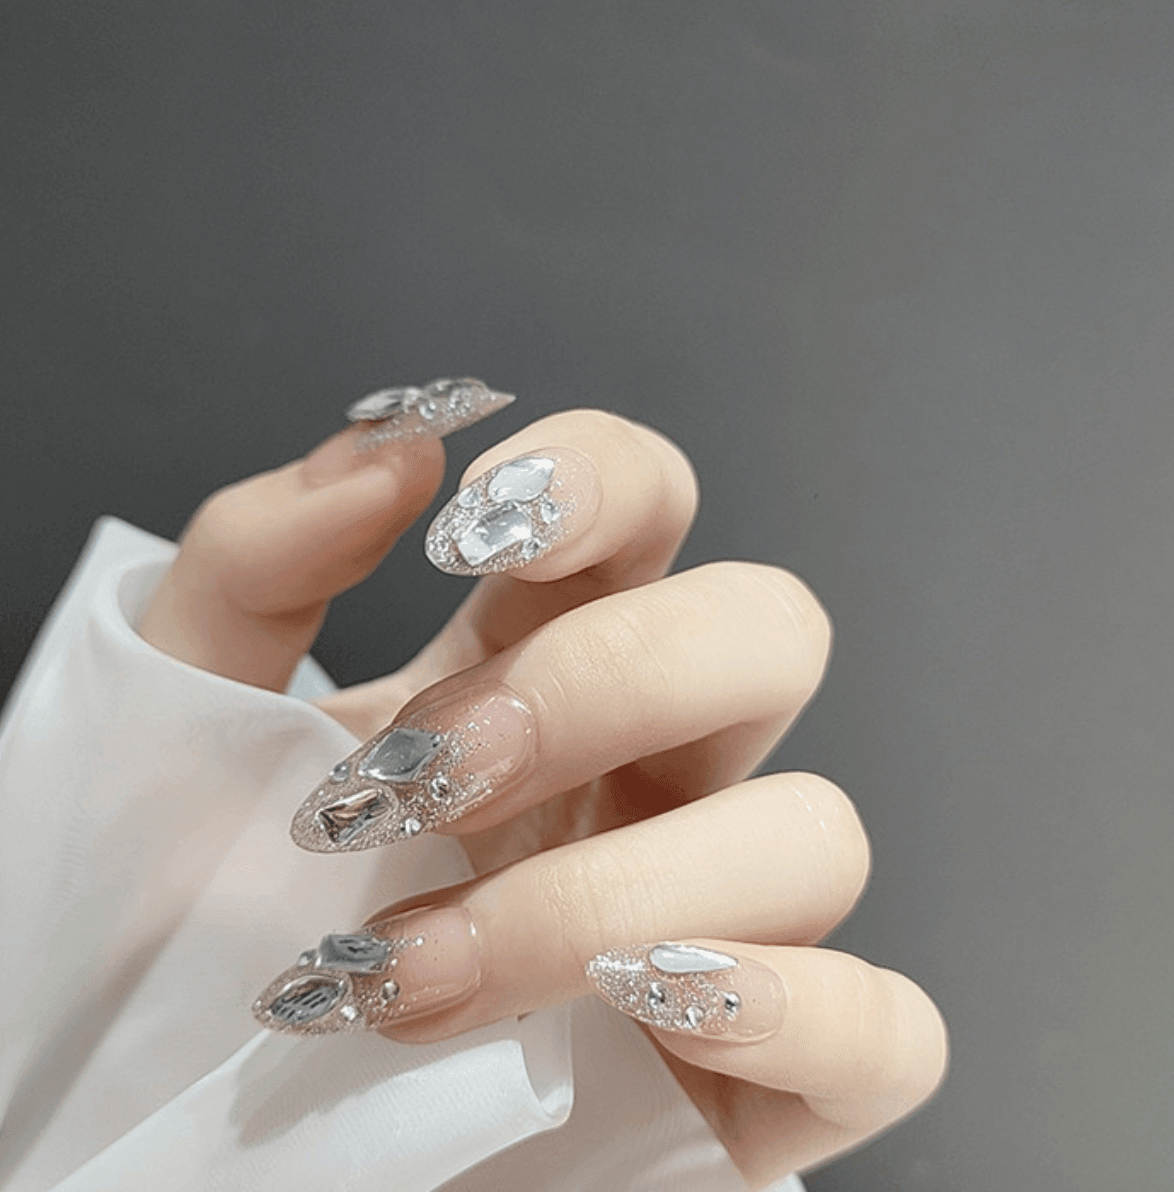 Buy Almond Fake Nail Tips - 500PCS Medium Almond Shaped Clear Acrylic Nails  Full Cover Press on Nails for DIY Nail Art, 10 Sizes Online at Low Prices  in India - Amazon.in